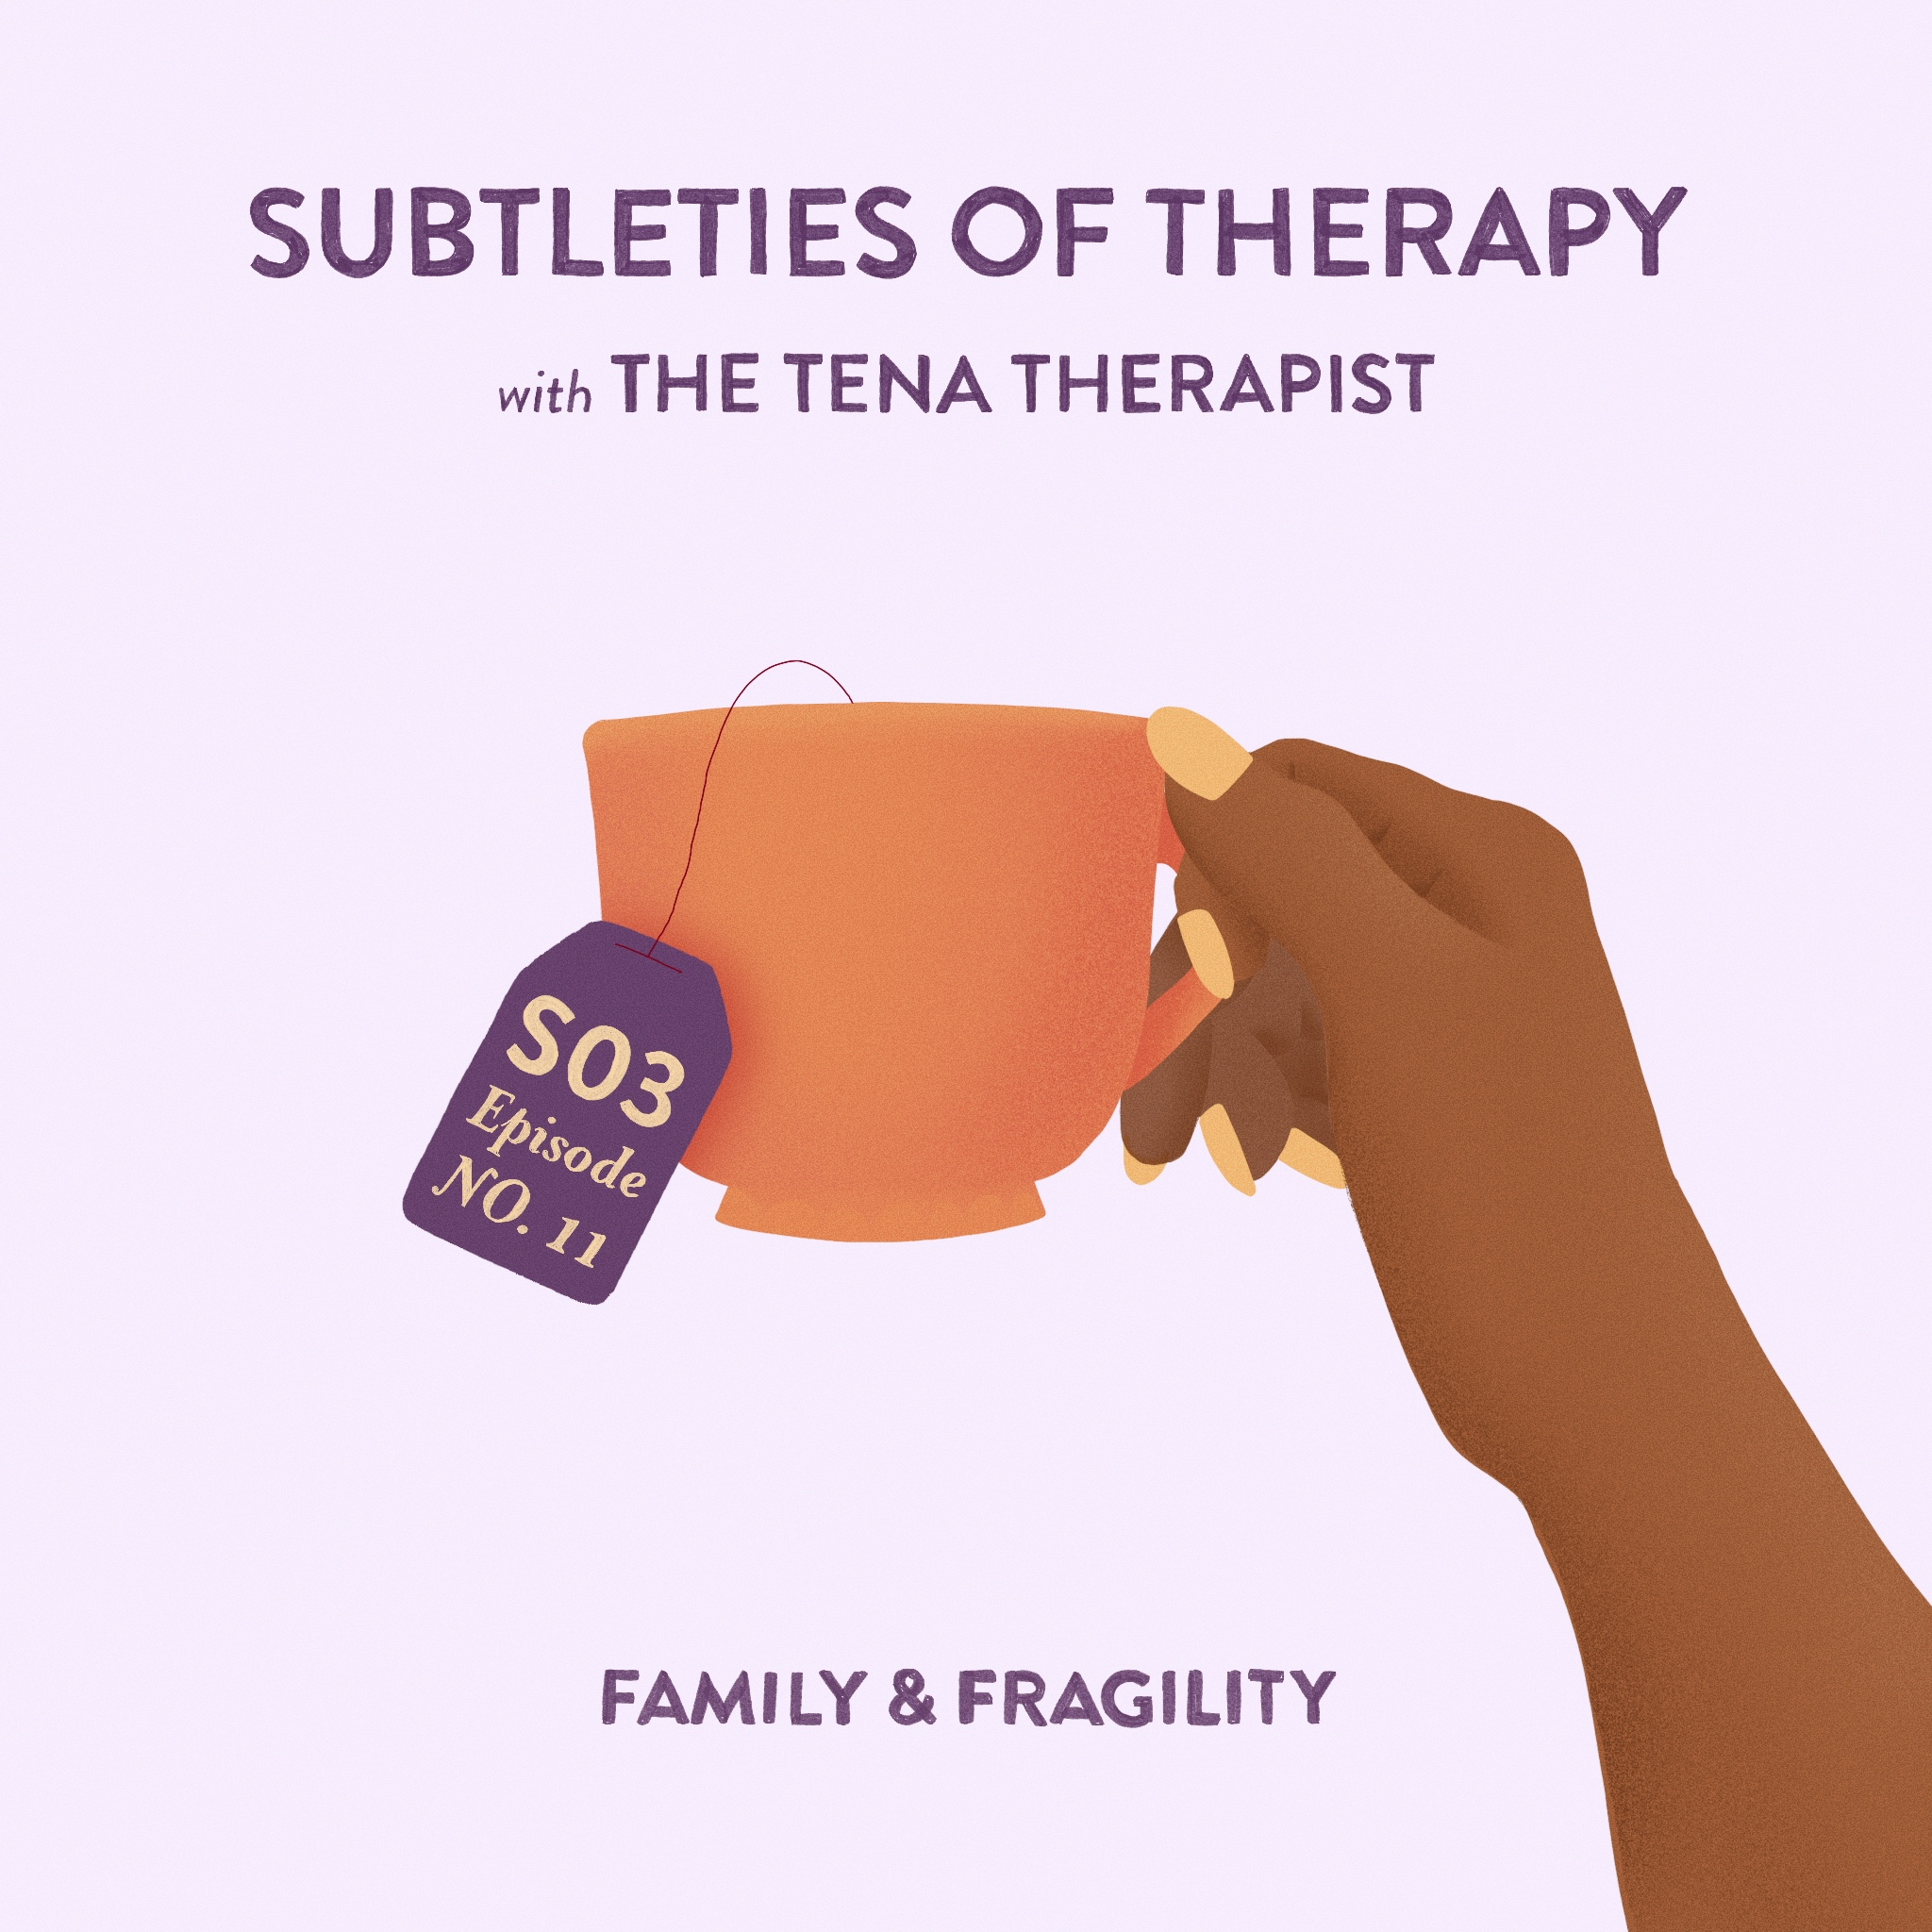 Subtleties of Therapy with The Tena Therapist